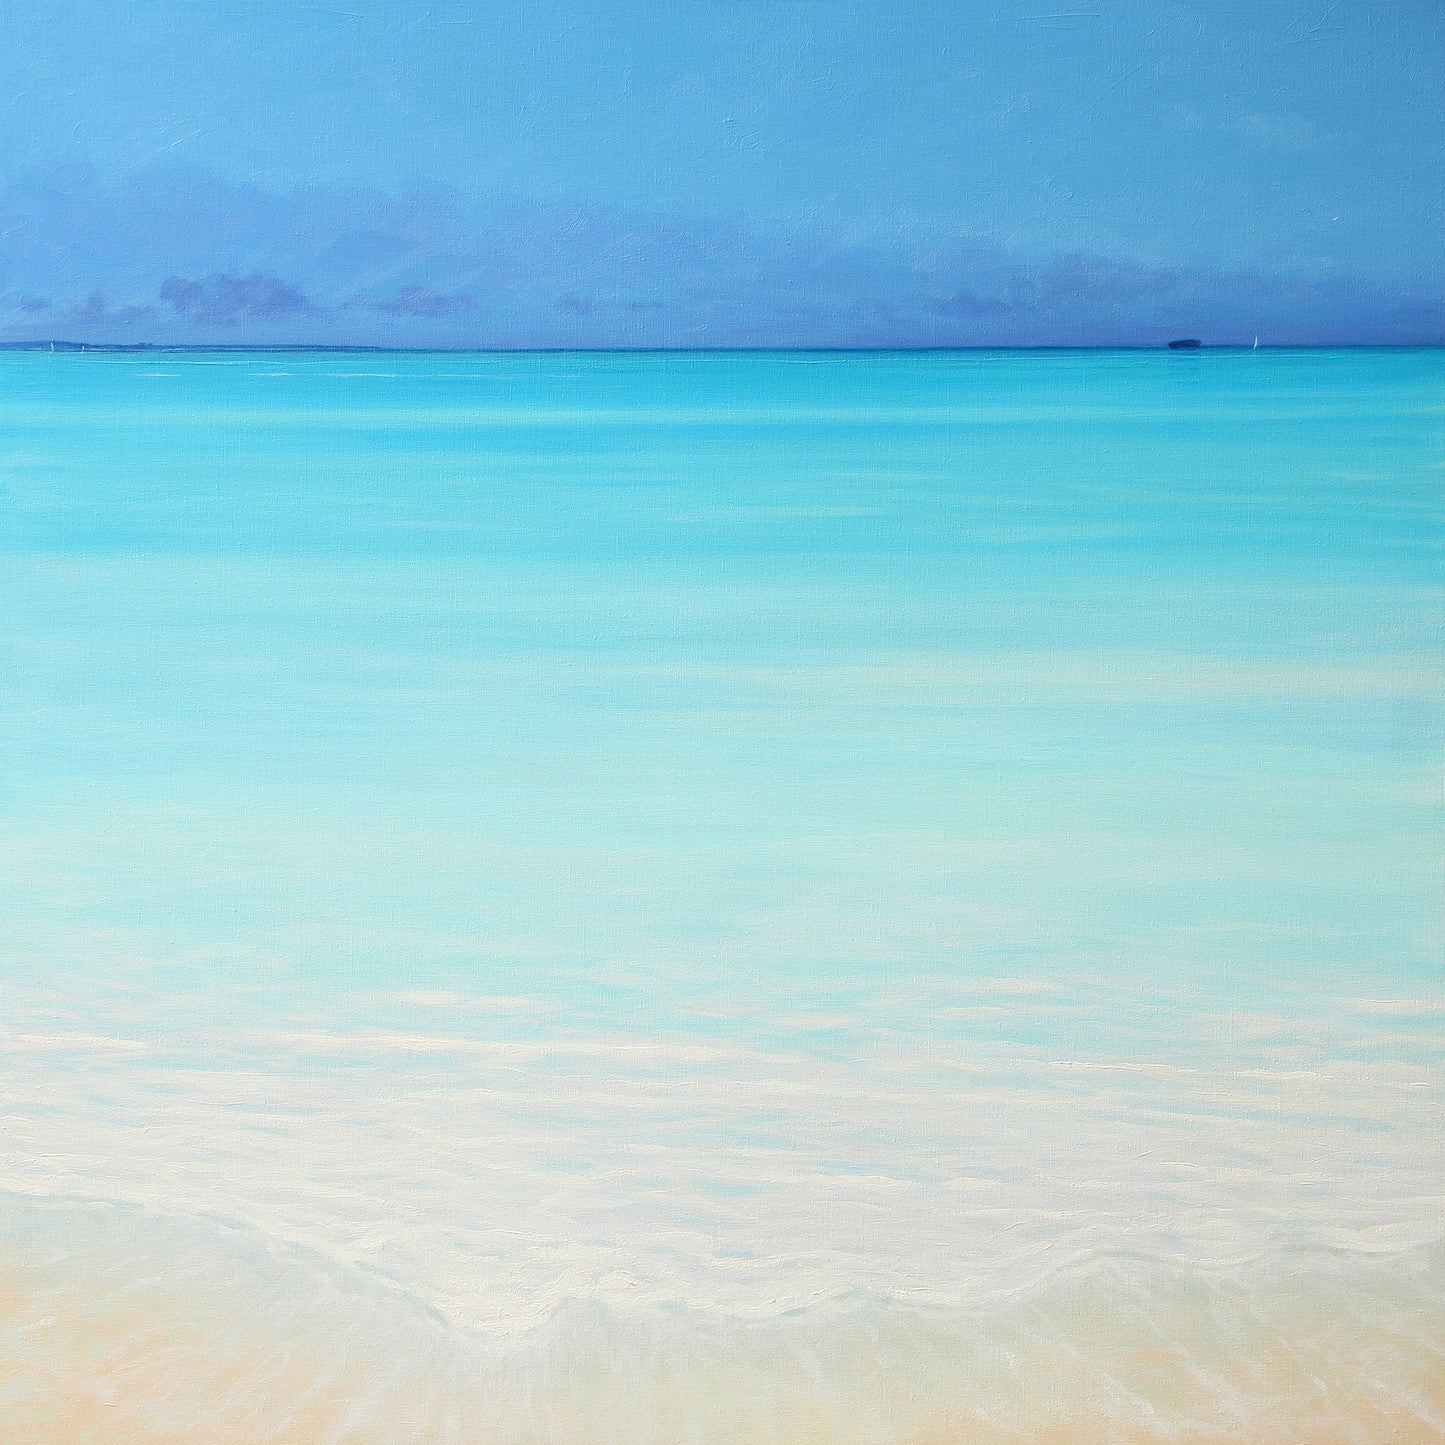 View To Don't Rock. 2008. 44ins x 44ins. Seascape painting by Derek Hare